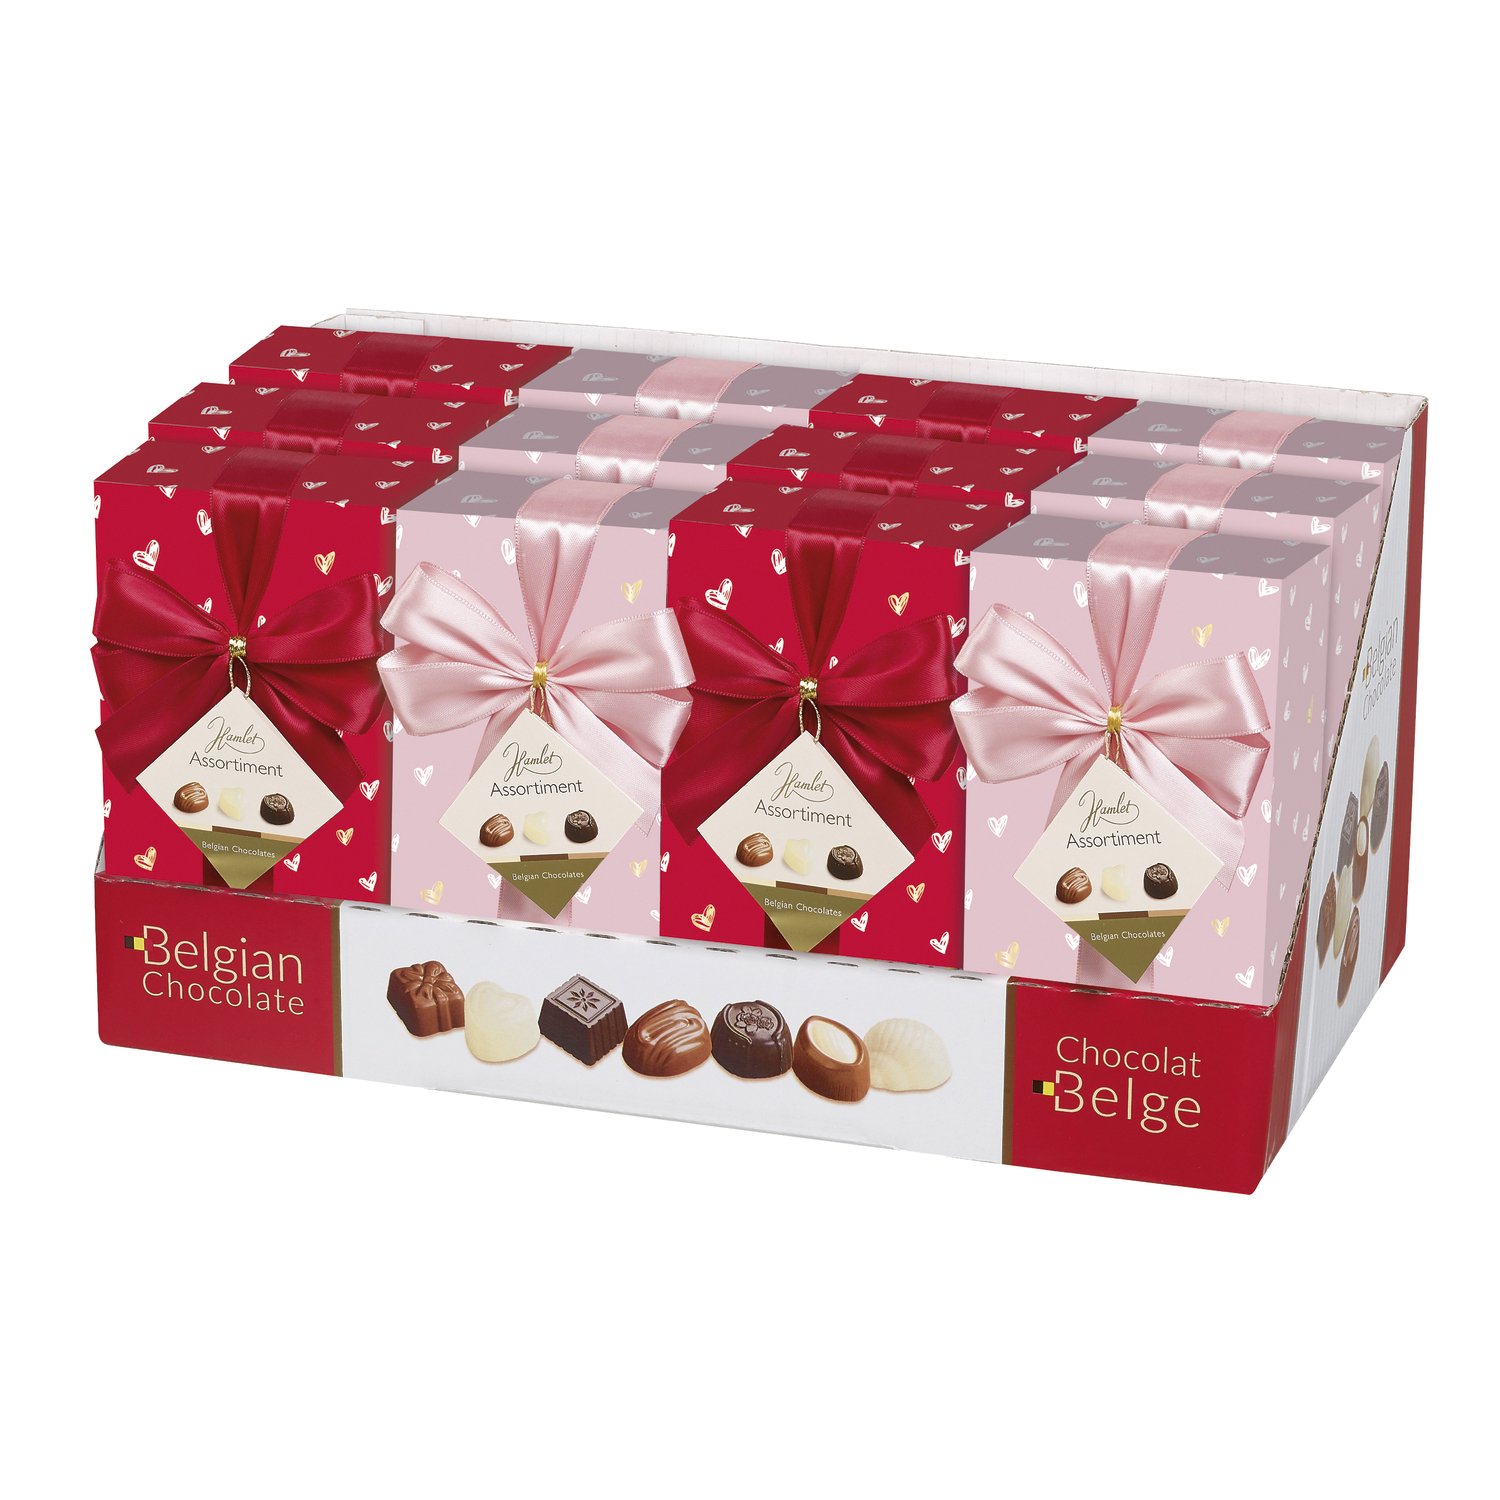 Valentine Line gift wrapped ballotins of asstd Belgian chocs in display - 12x250g